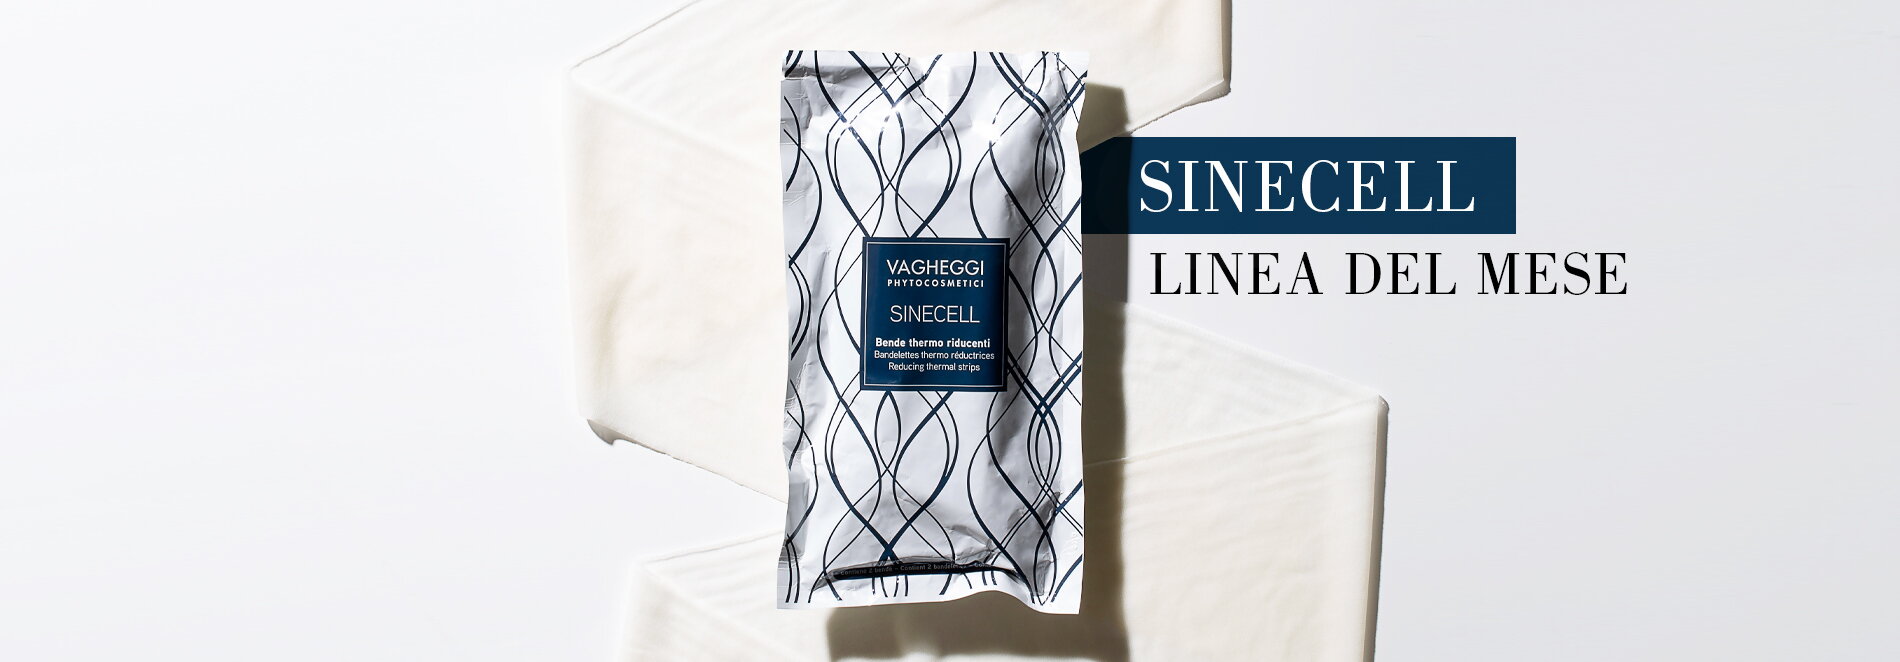 sinecell